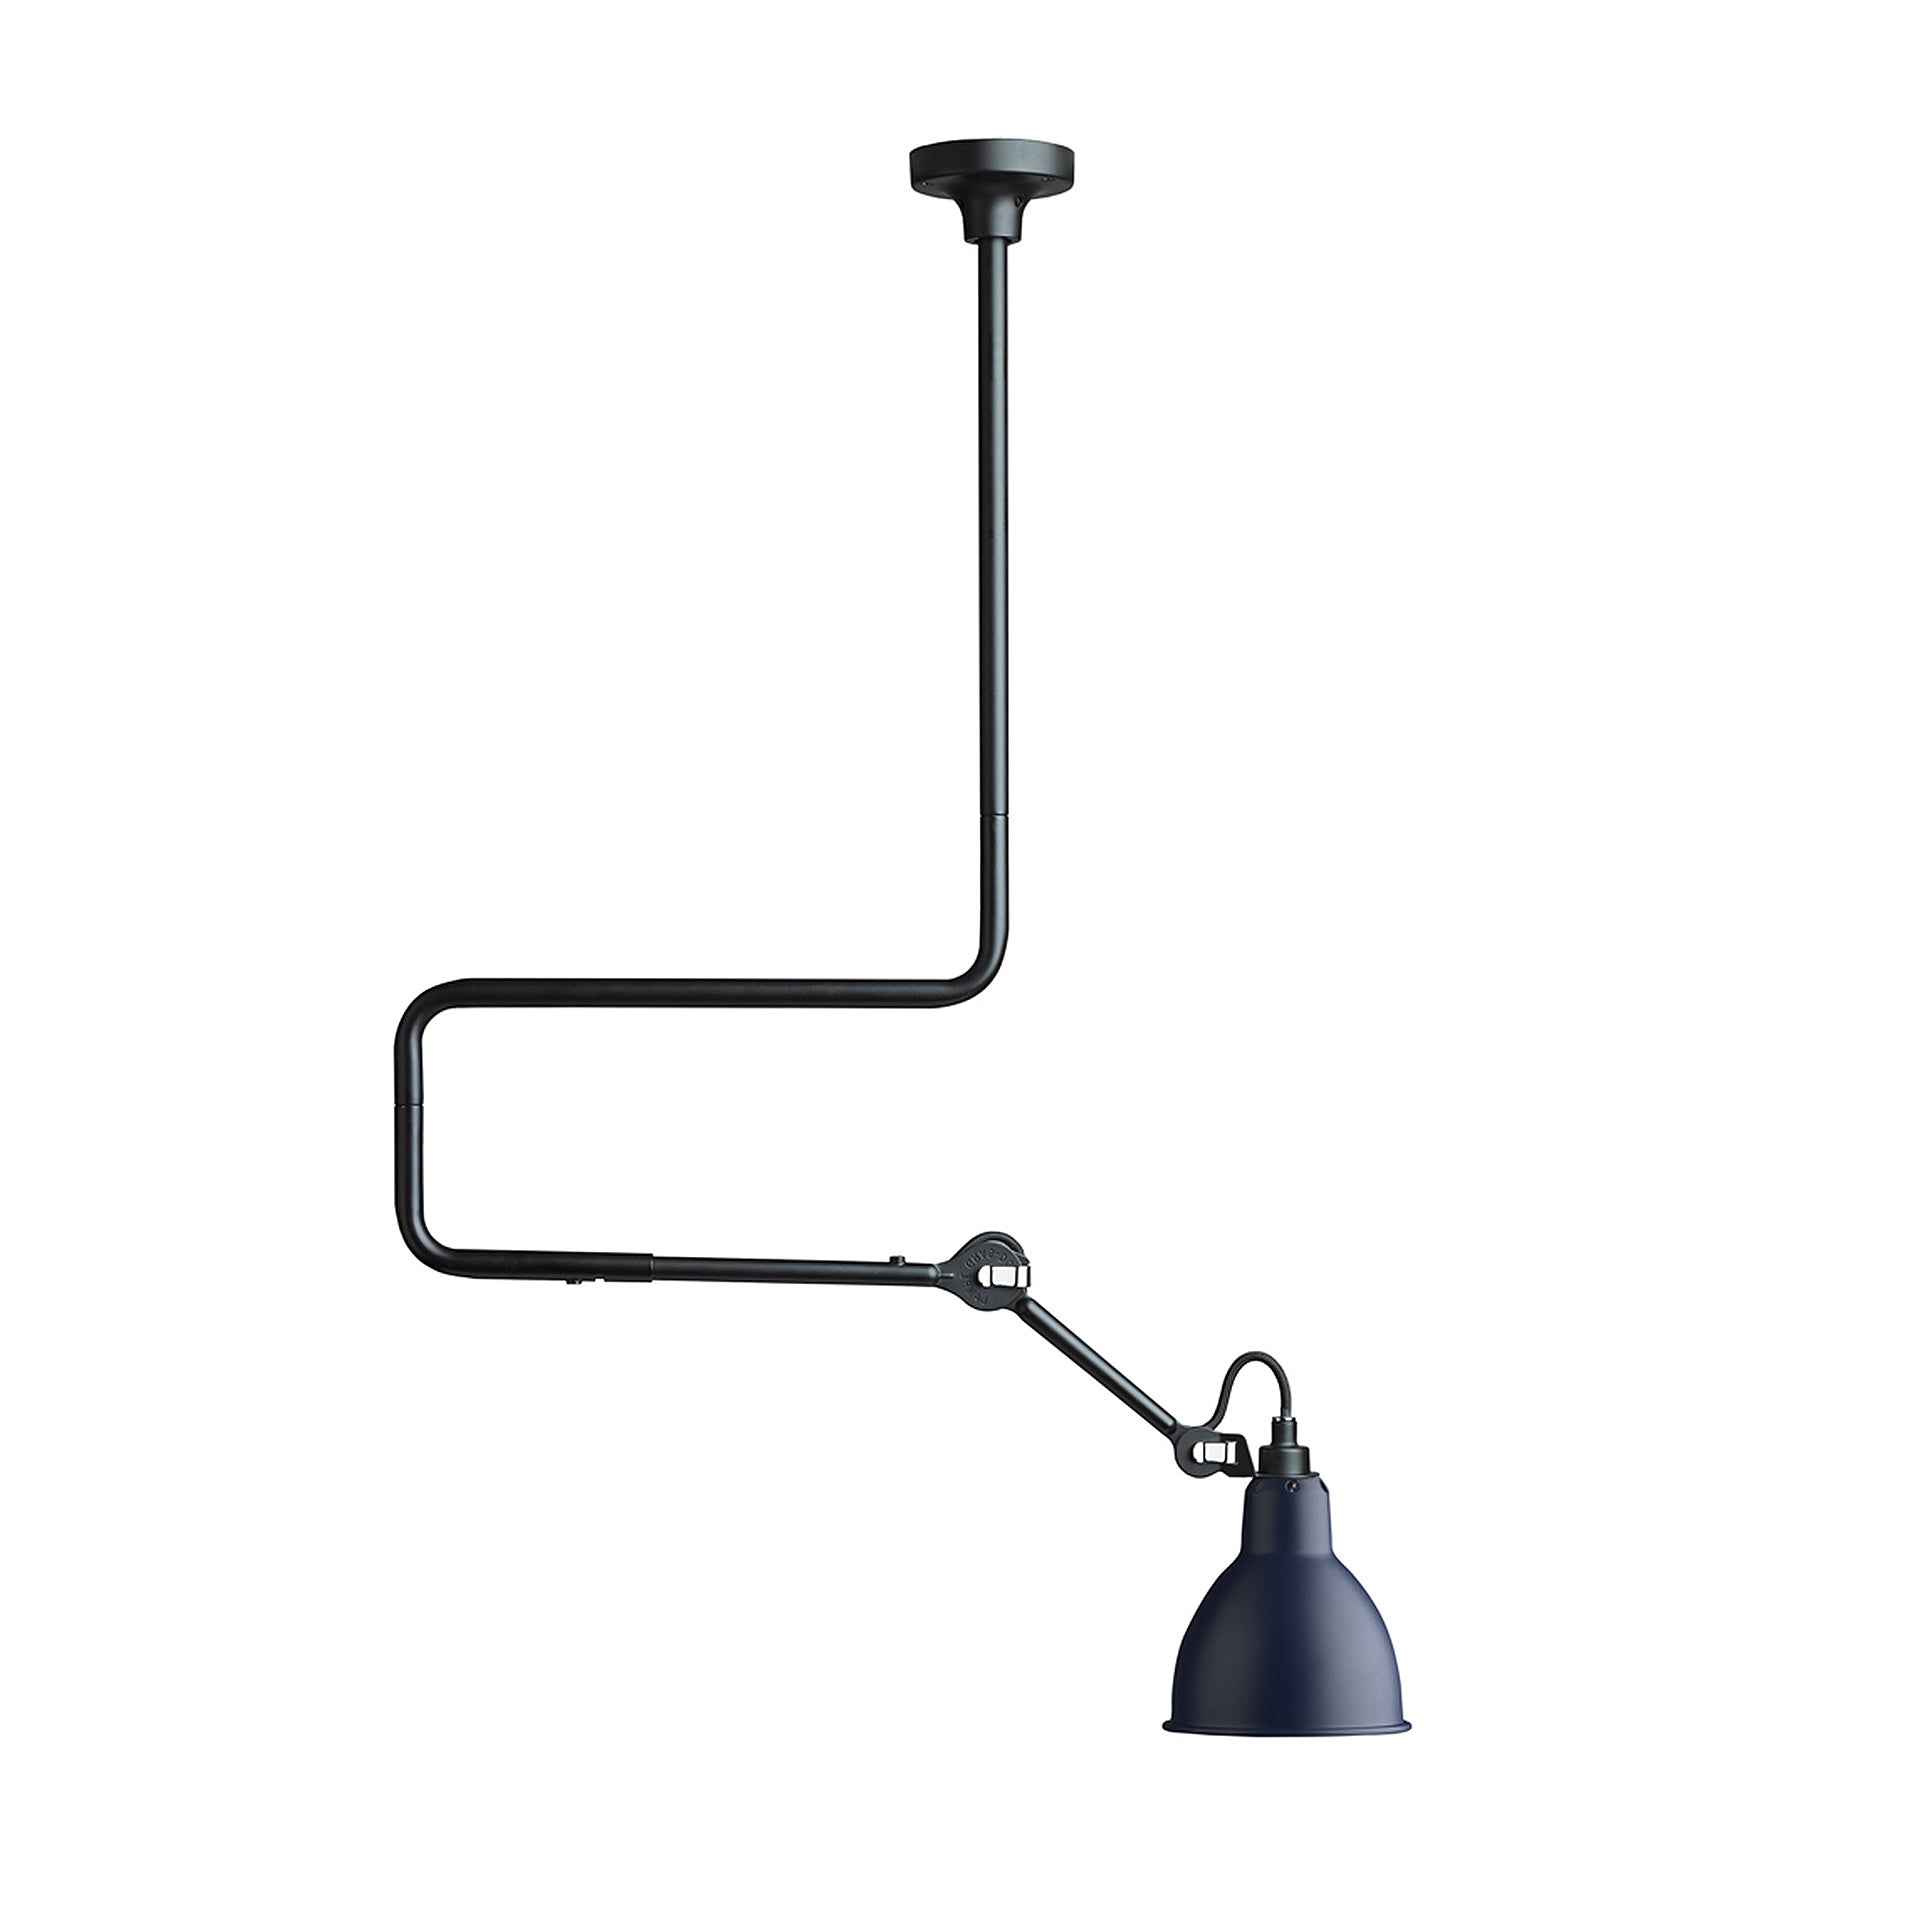 DCW Editions - Lampe Gras 312 - Plafondlamp Lampen DCW Editions   